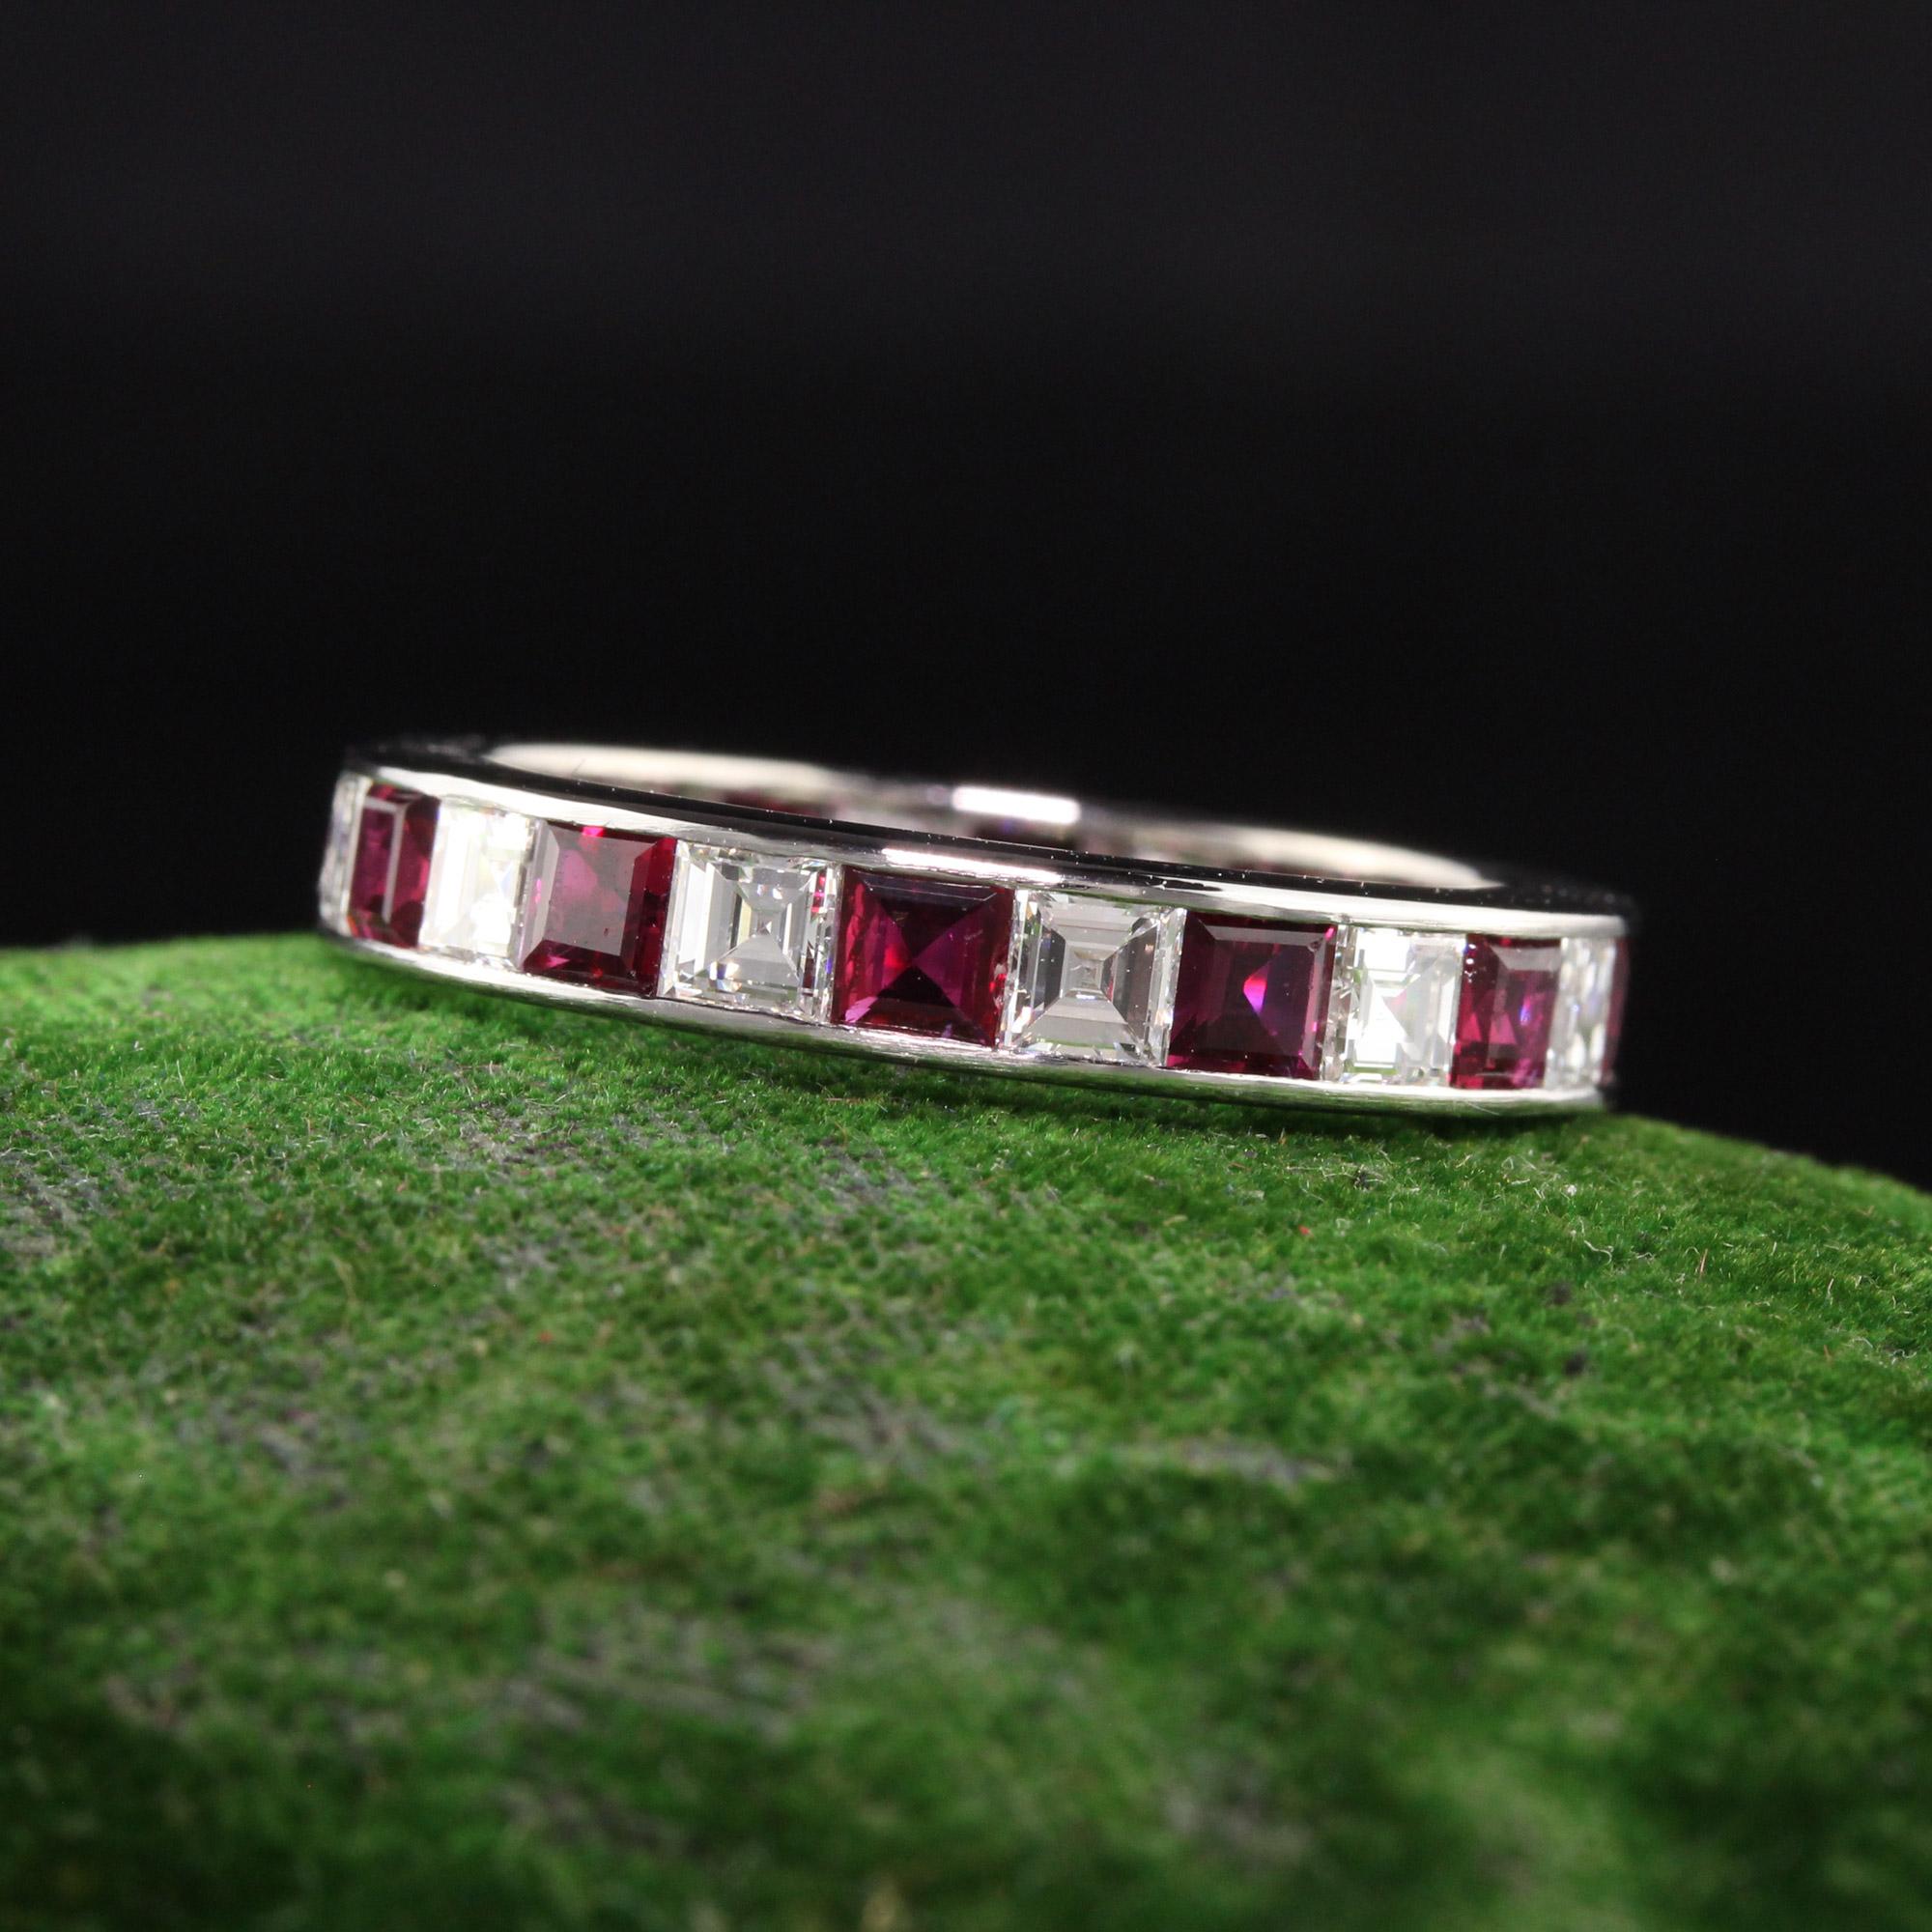 Beautiful Antique Art Deco Platinum Carre Cut Diamond and Ruby Eternity Band. This gorgeous wedding band is crafted in platinum. There are white carre cut diamonds alternating with vivid red rubies going around the entire ring and is in great